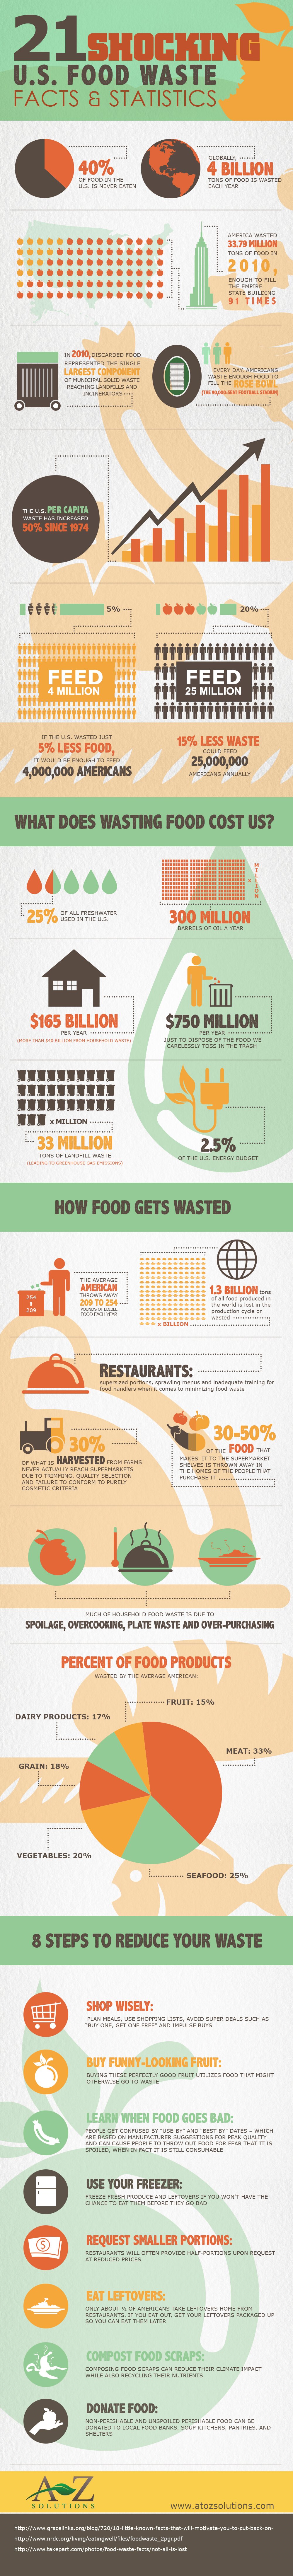 Shocking Stats of Food to Waste